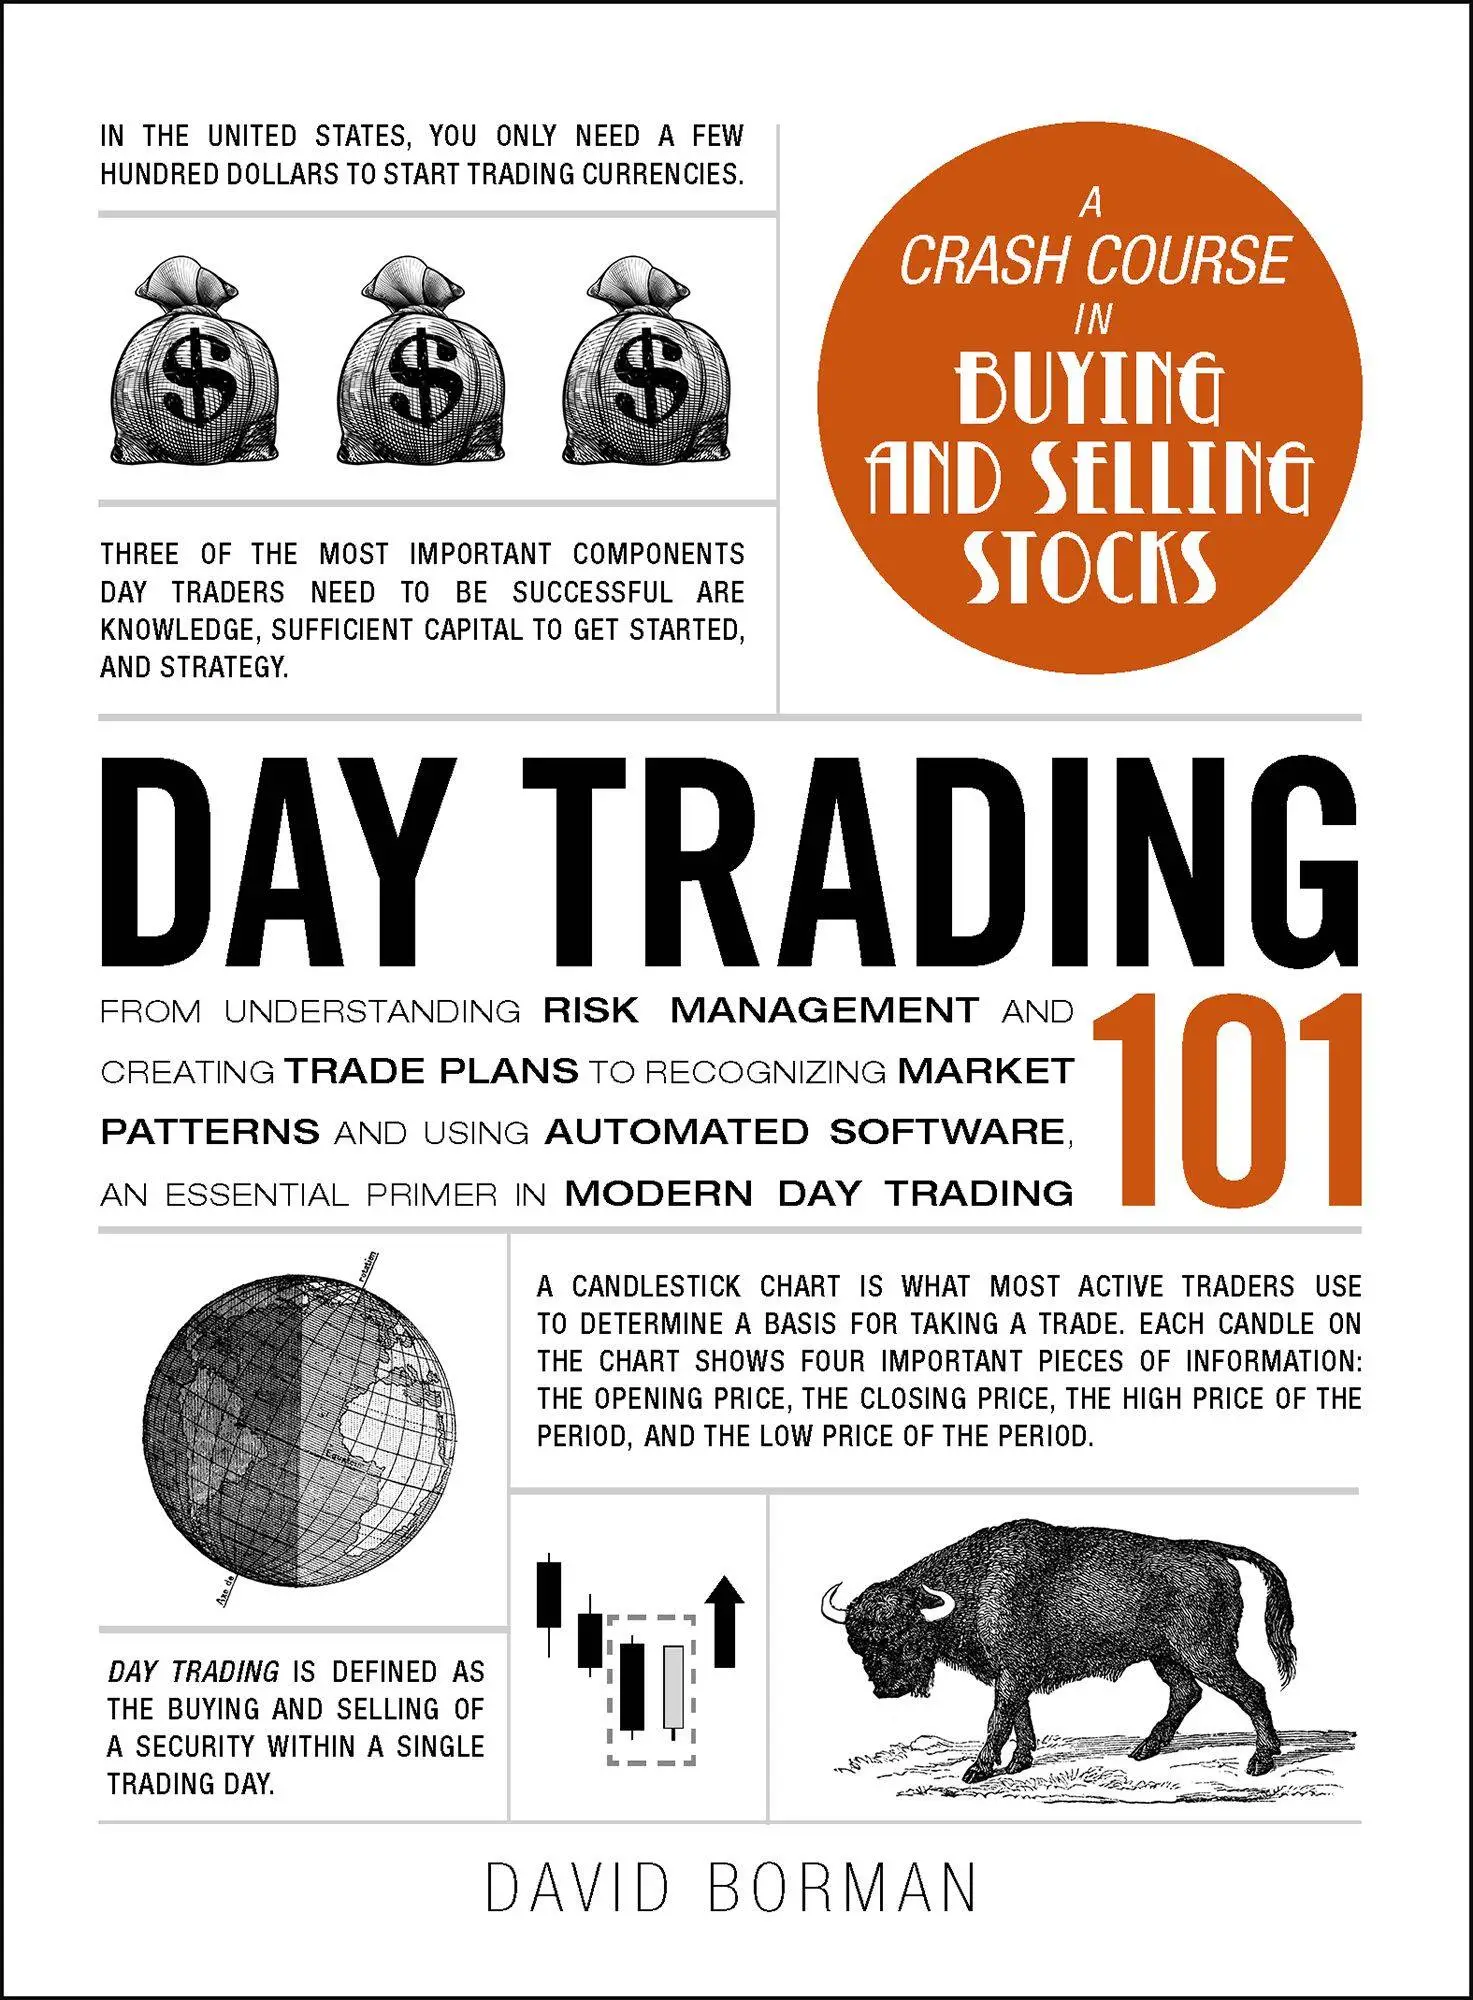 Day Trading 101 From Understanding Risk Management and Creating Trade
Plans to Recognizing Market Patterns and Using Automated Software an
Essential Primer in Modern Day Trading Adams 101 Epub-Ebook